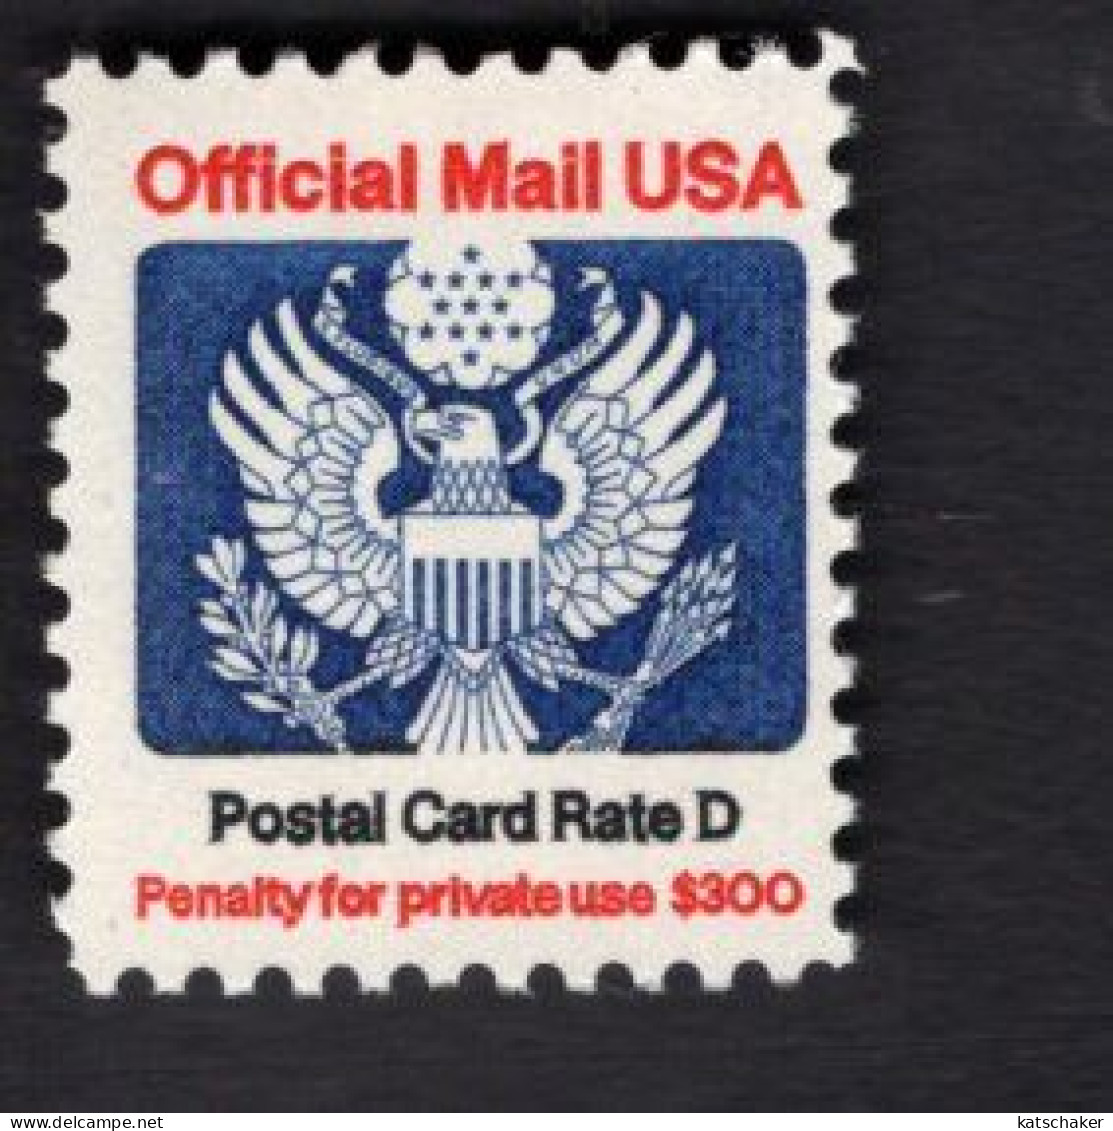 2008963964 1985 (XX) SCOTT O138 POSTFRIS MINT NEVER HINGED Eagle And Shield OFFICIAL MAIL -  POSTAL CARD RATE D - Officials